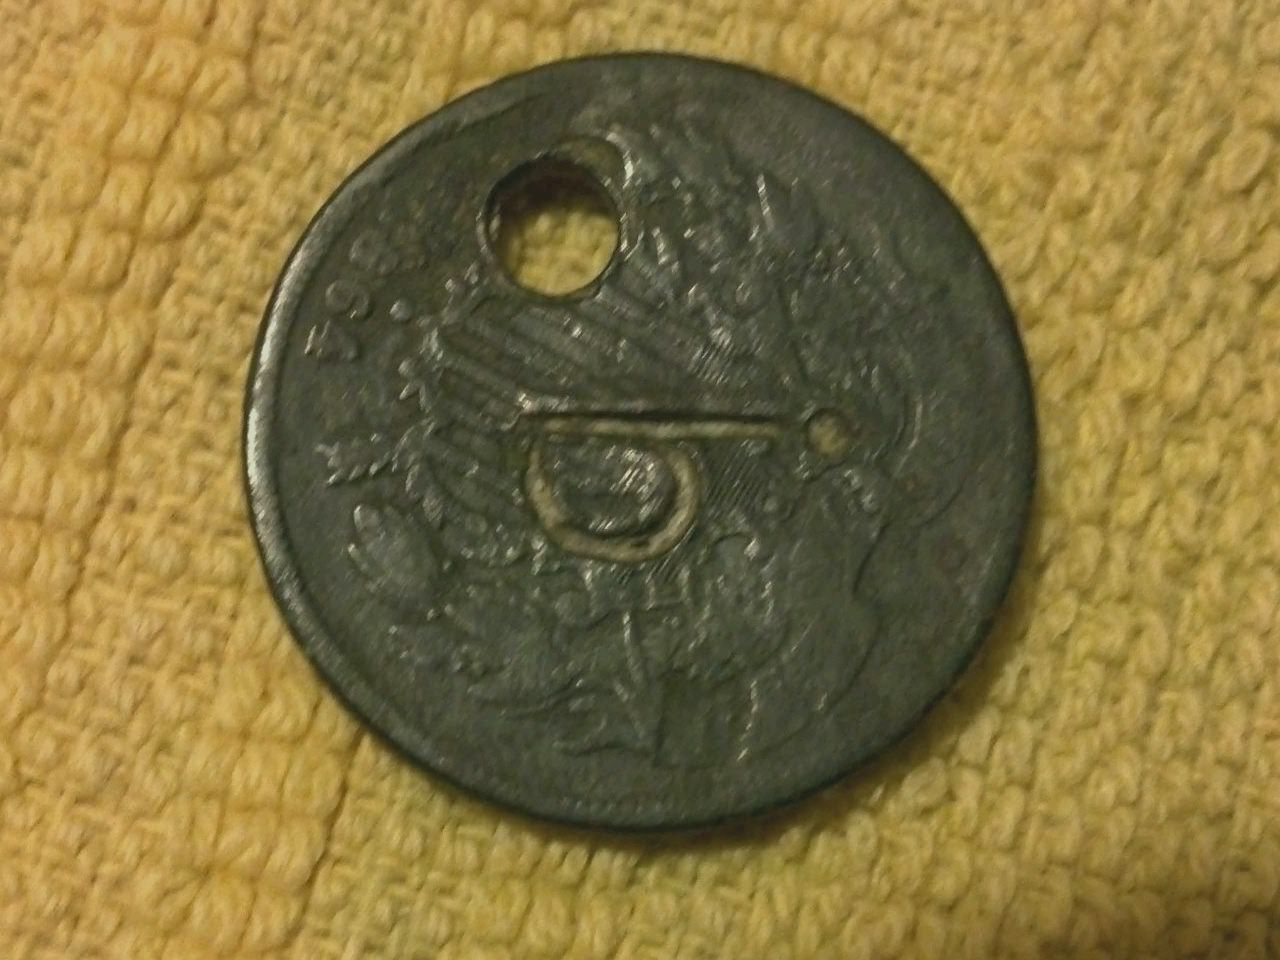 1864 2 cent with cannon stamped on it.